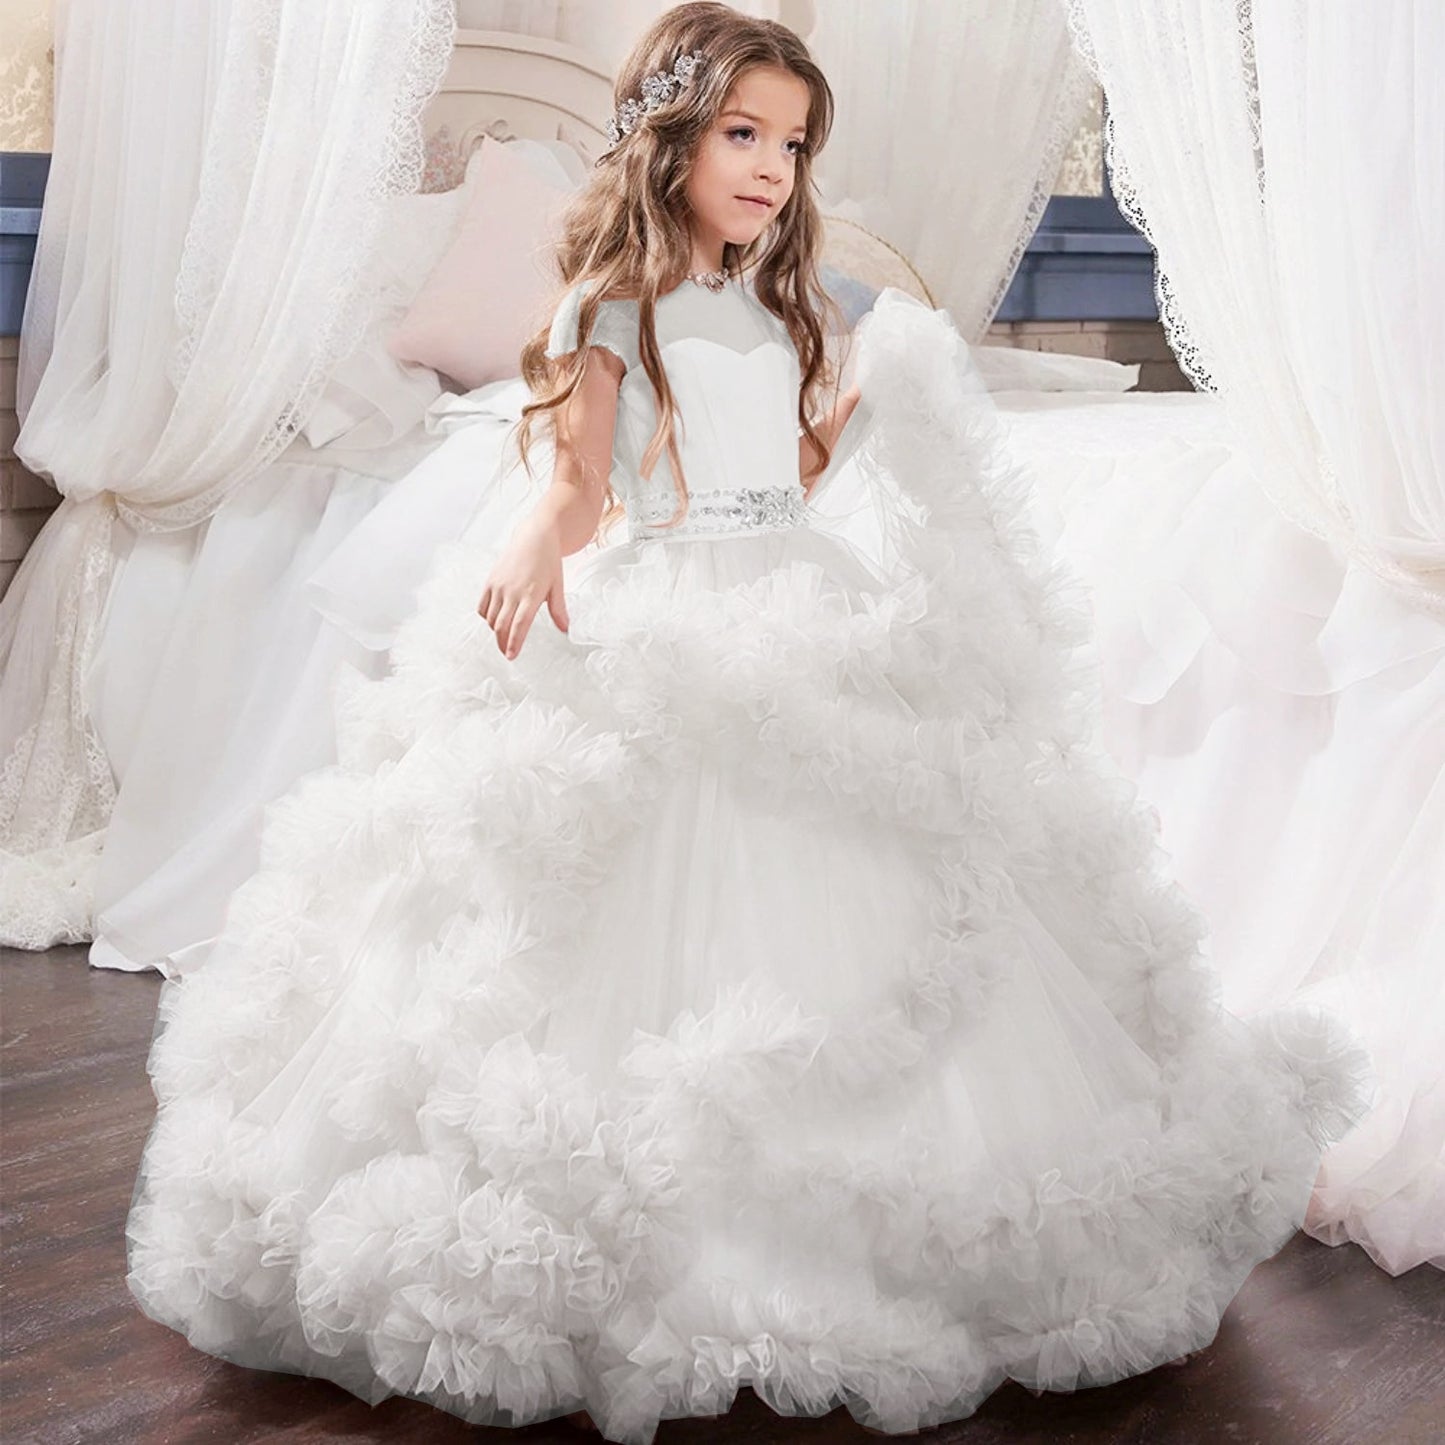 Costume Lace Long Party Flower Girl Wedding Dress